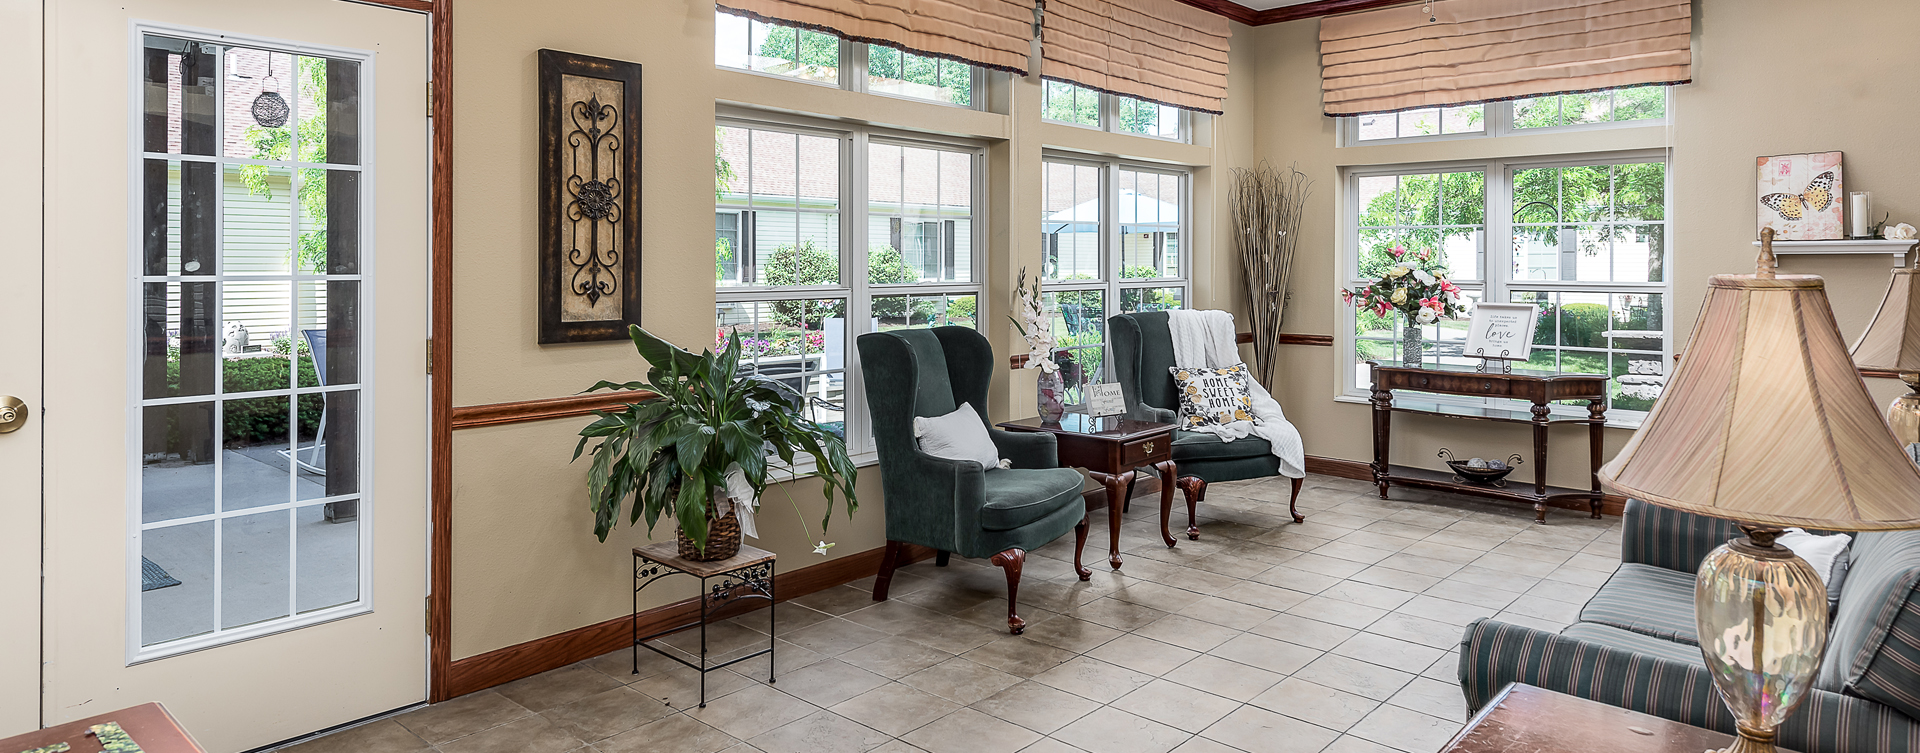 Relax in the warmth of the sunroom at Bickford of Midland